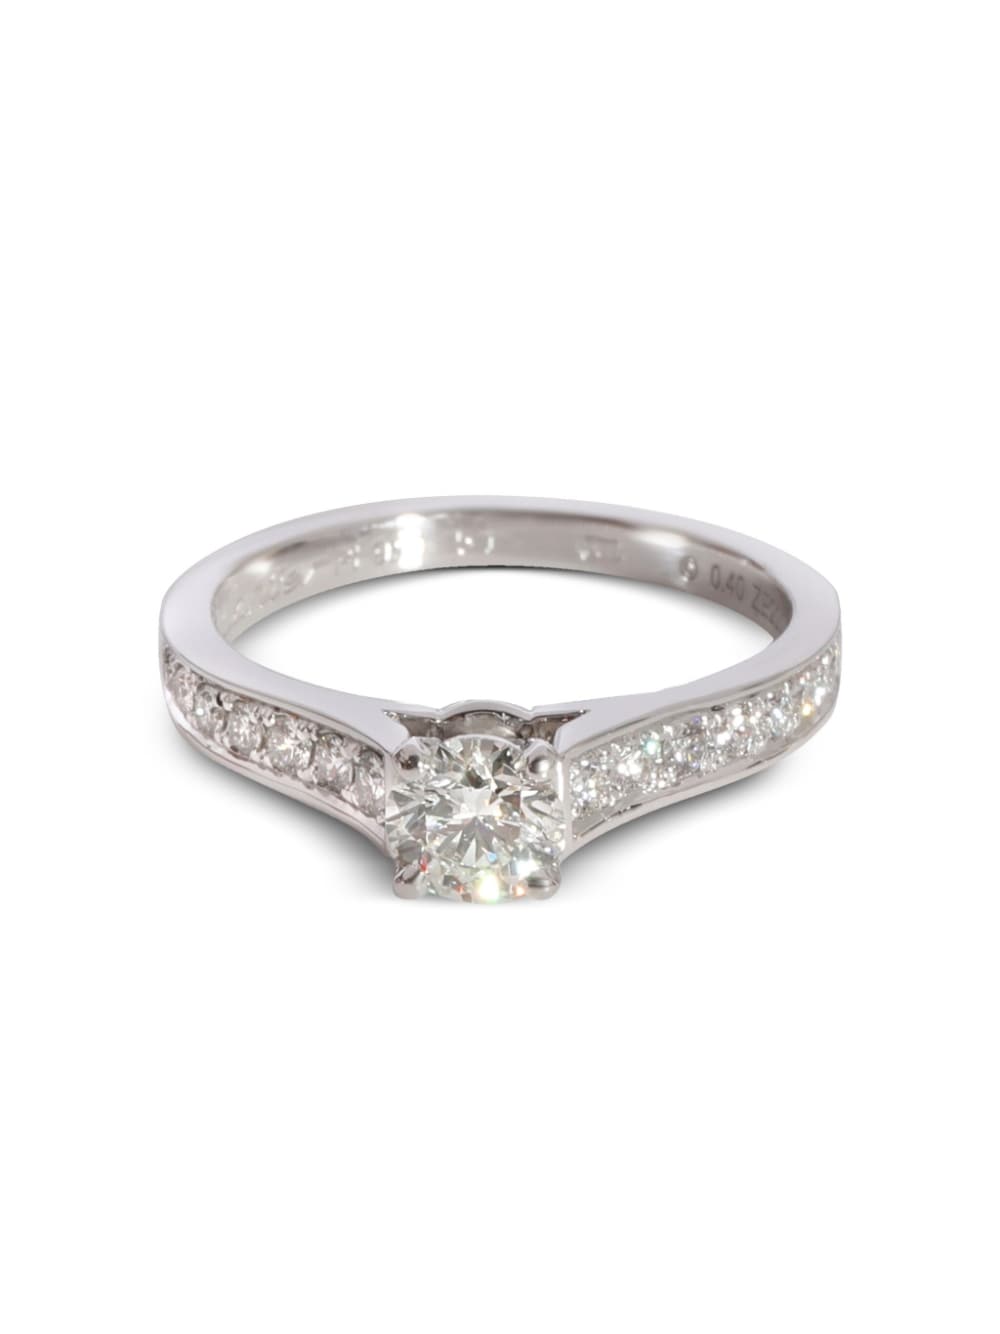 Cartier 1895 diamond engagement ring - Silver